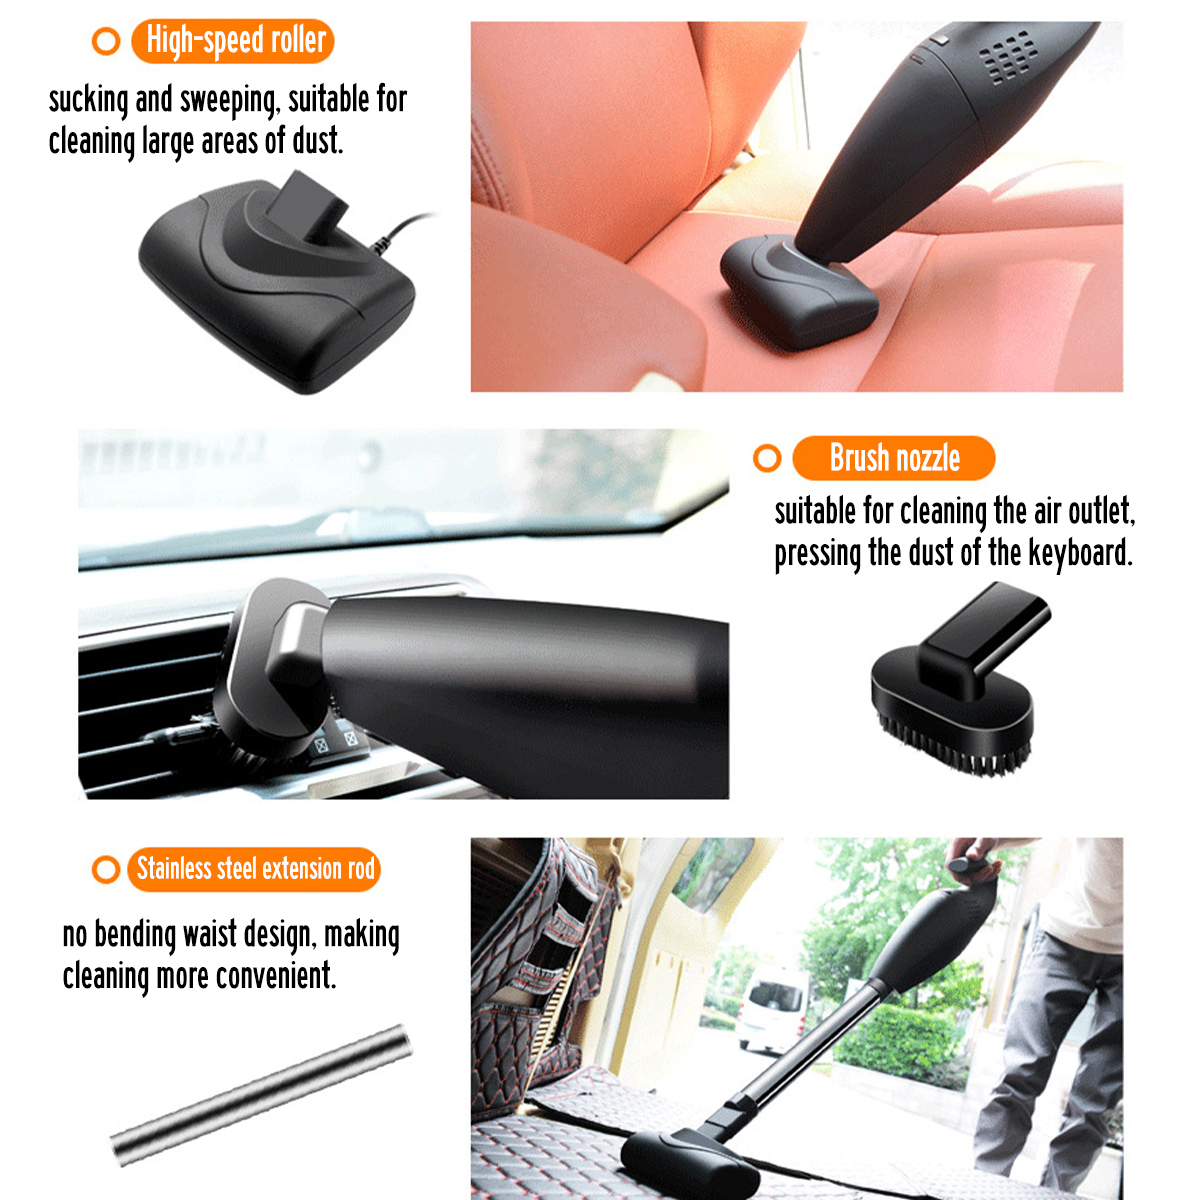 110-240V-120W-Handheld-Car-Wireless-Vacuum-Cleaner-With-High-Power-Dual-Purpose-Wet--Dry-Portable-Re-1581227-7